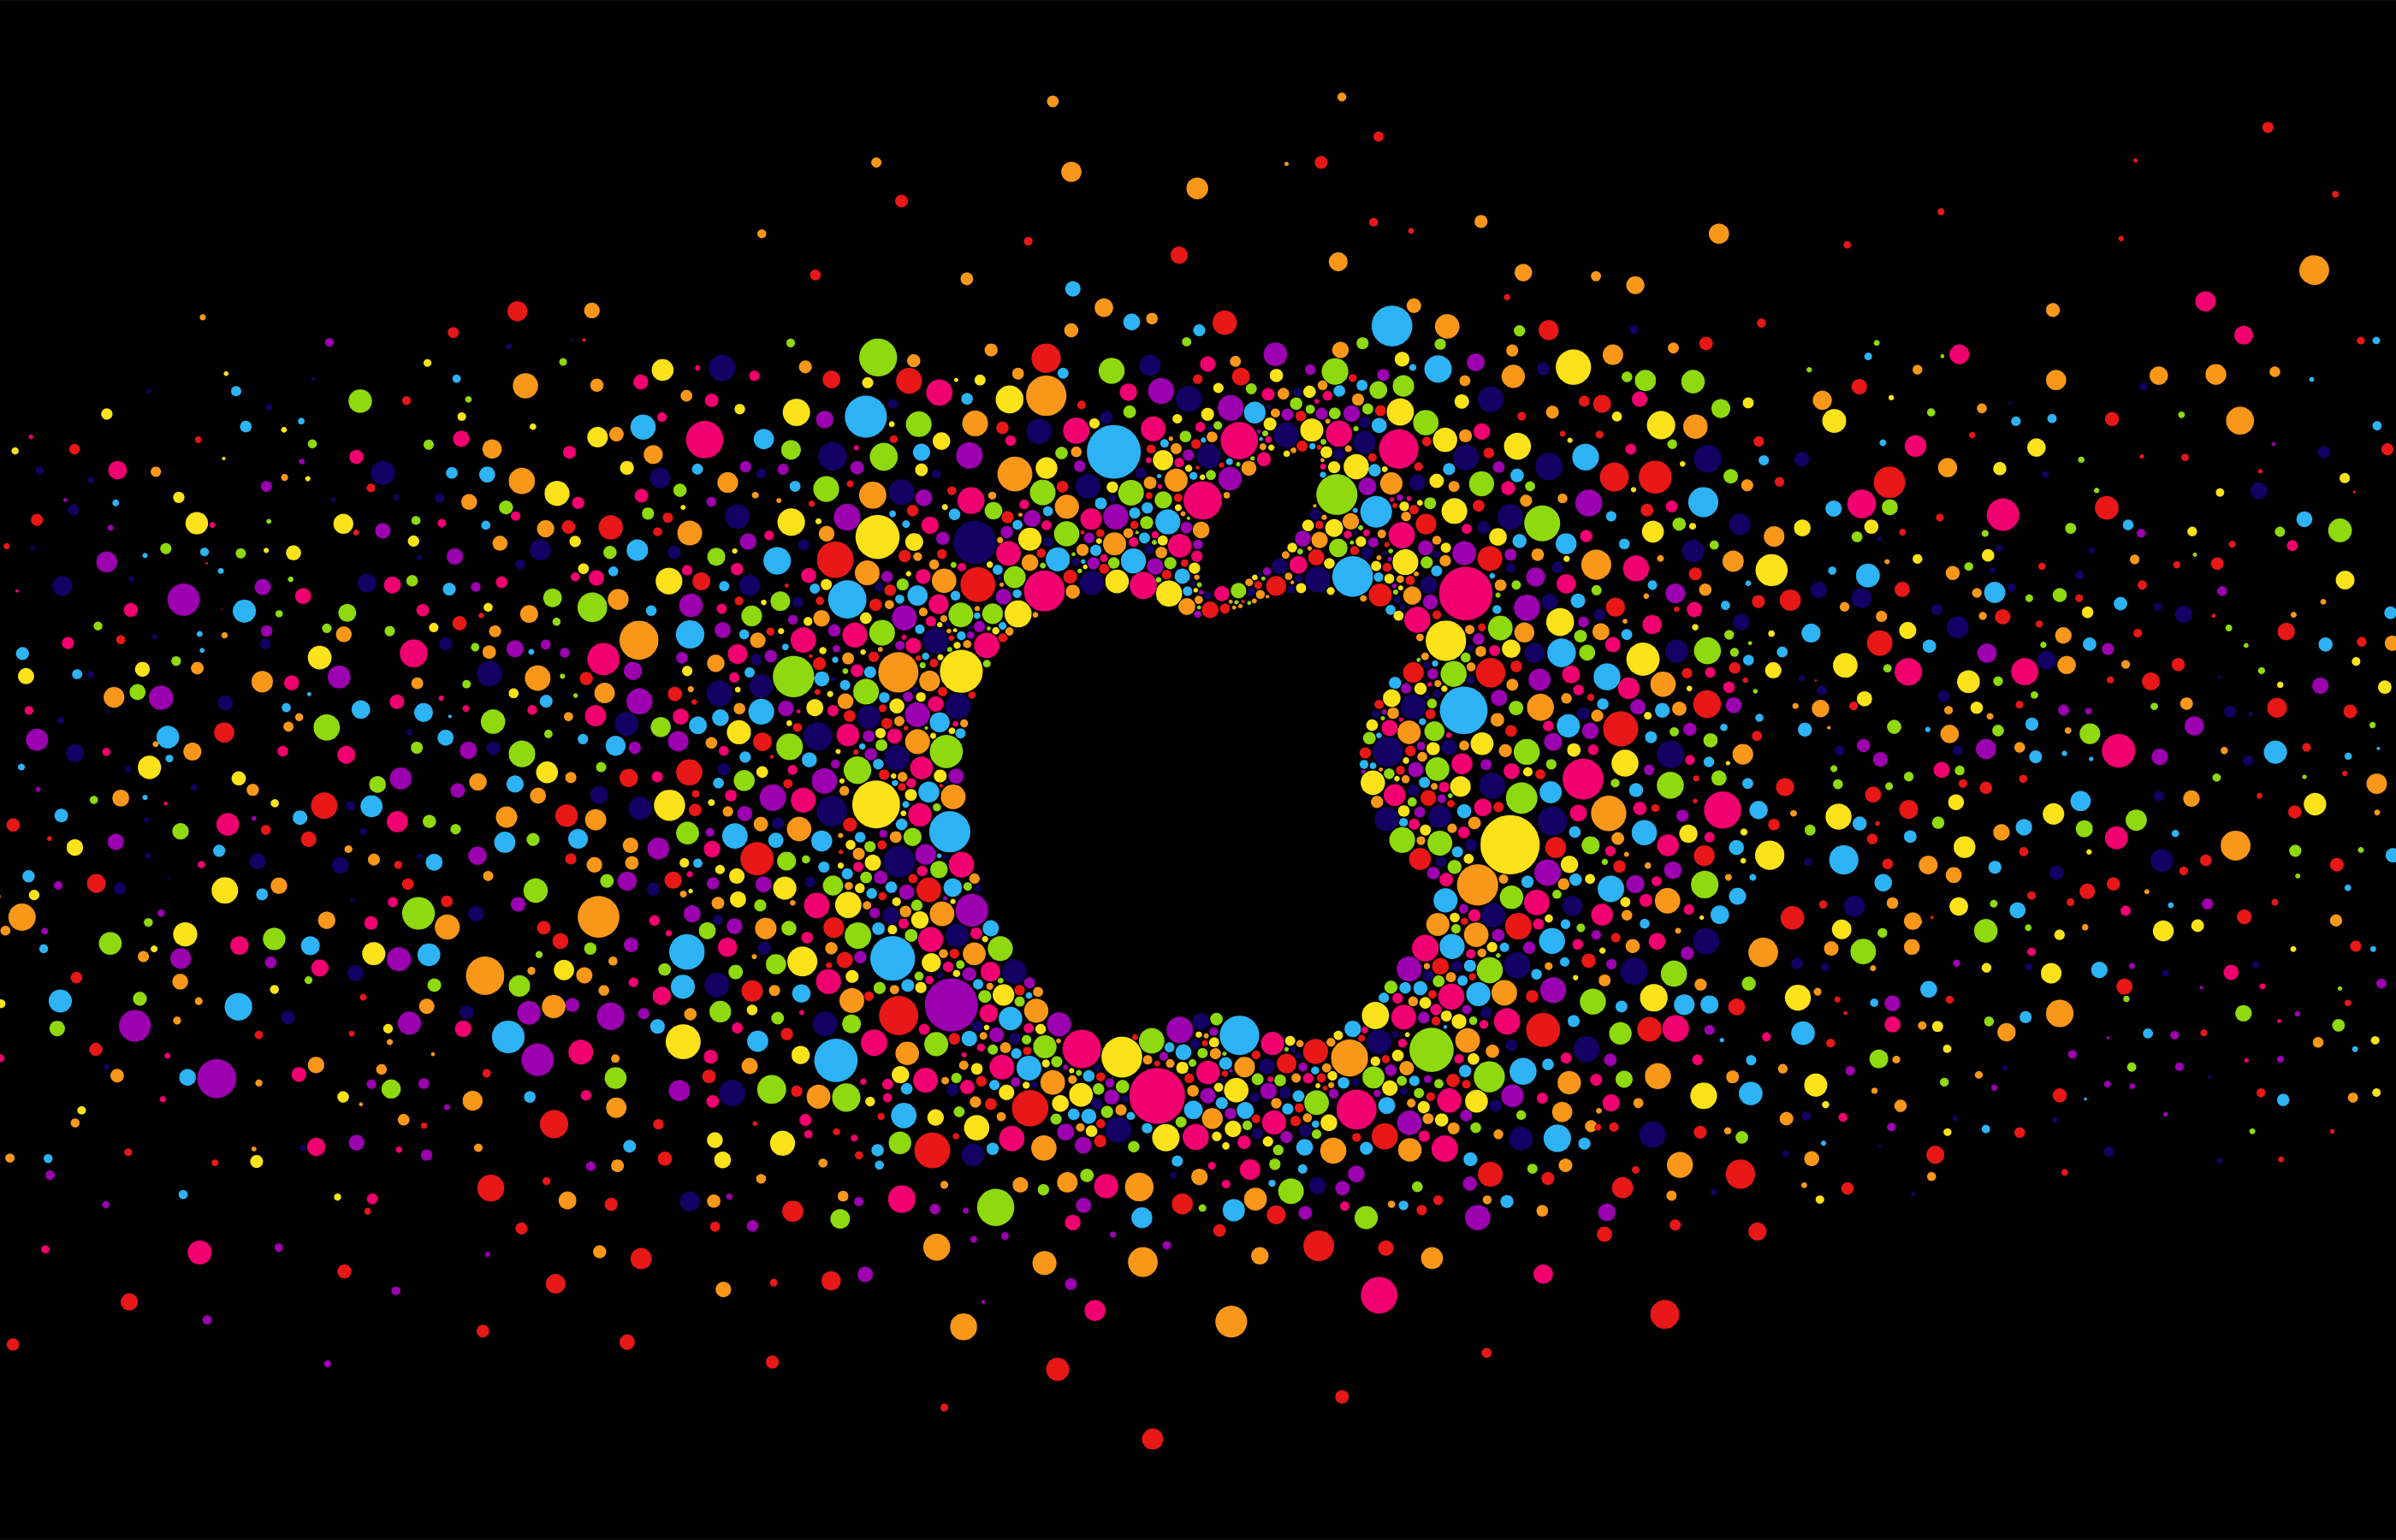 Colorful Apple Logo On Black Background Hd Wallpaper | Hot Sex Picture